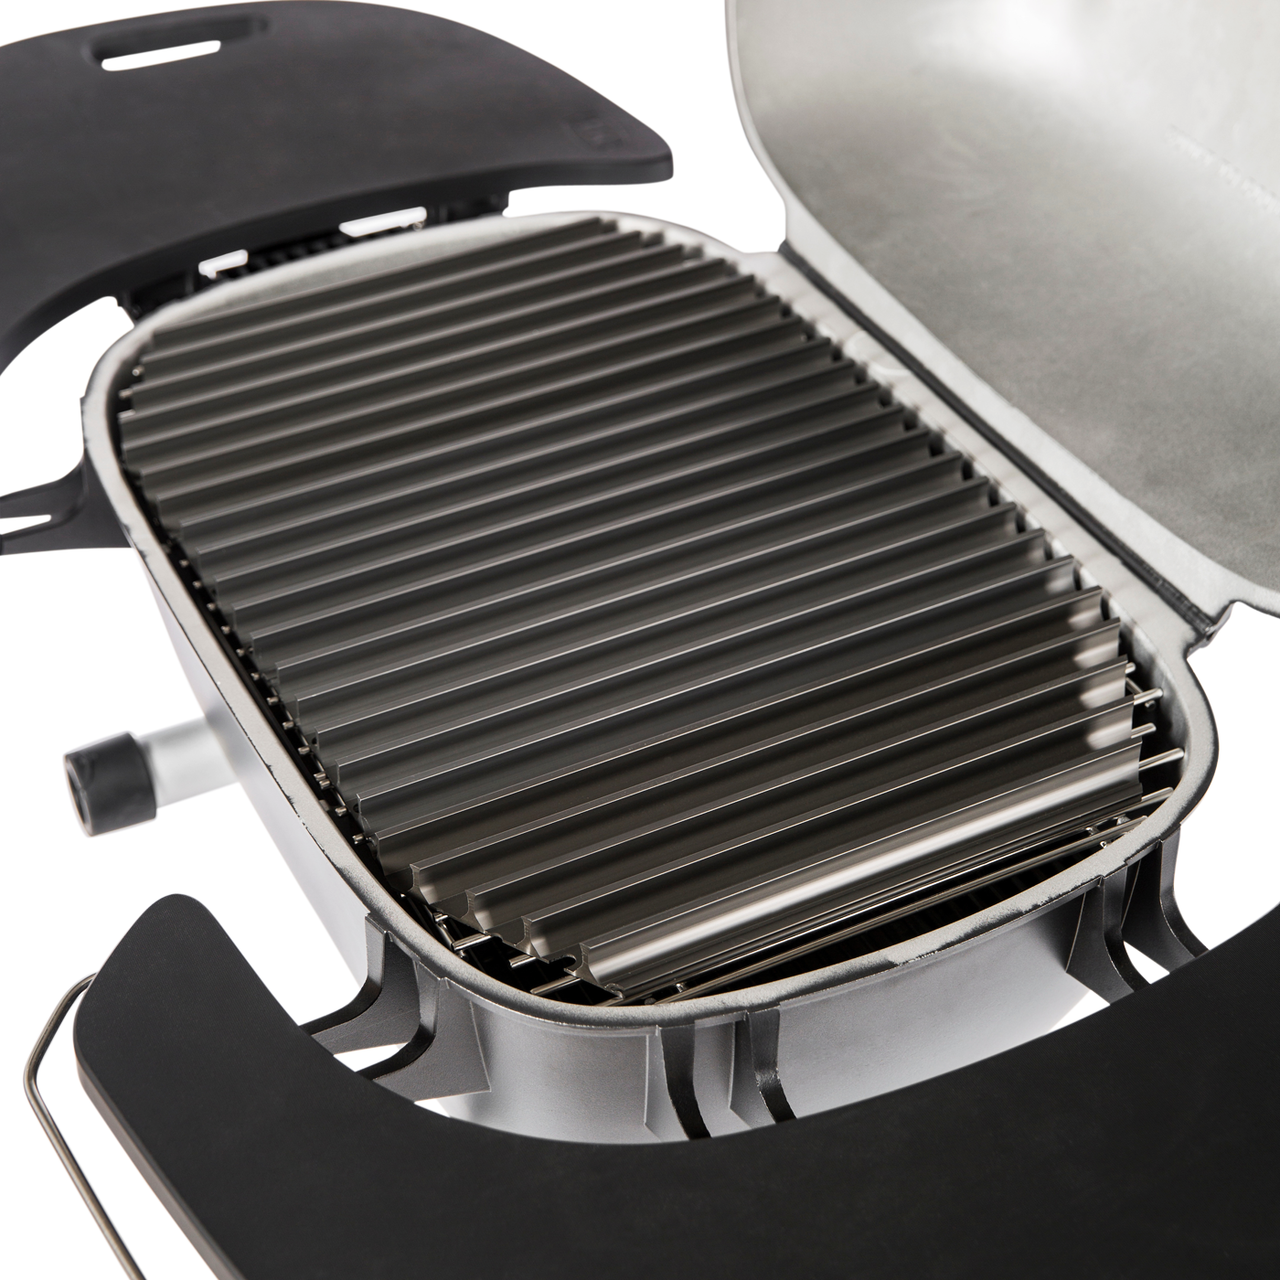 PK360-Graphite-Grill-14-Open.png